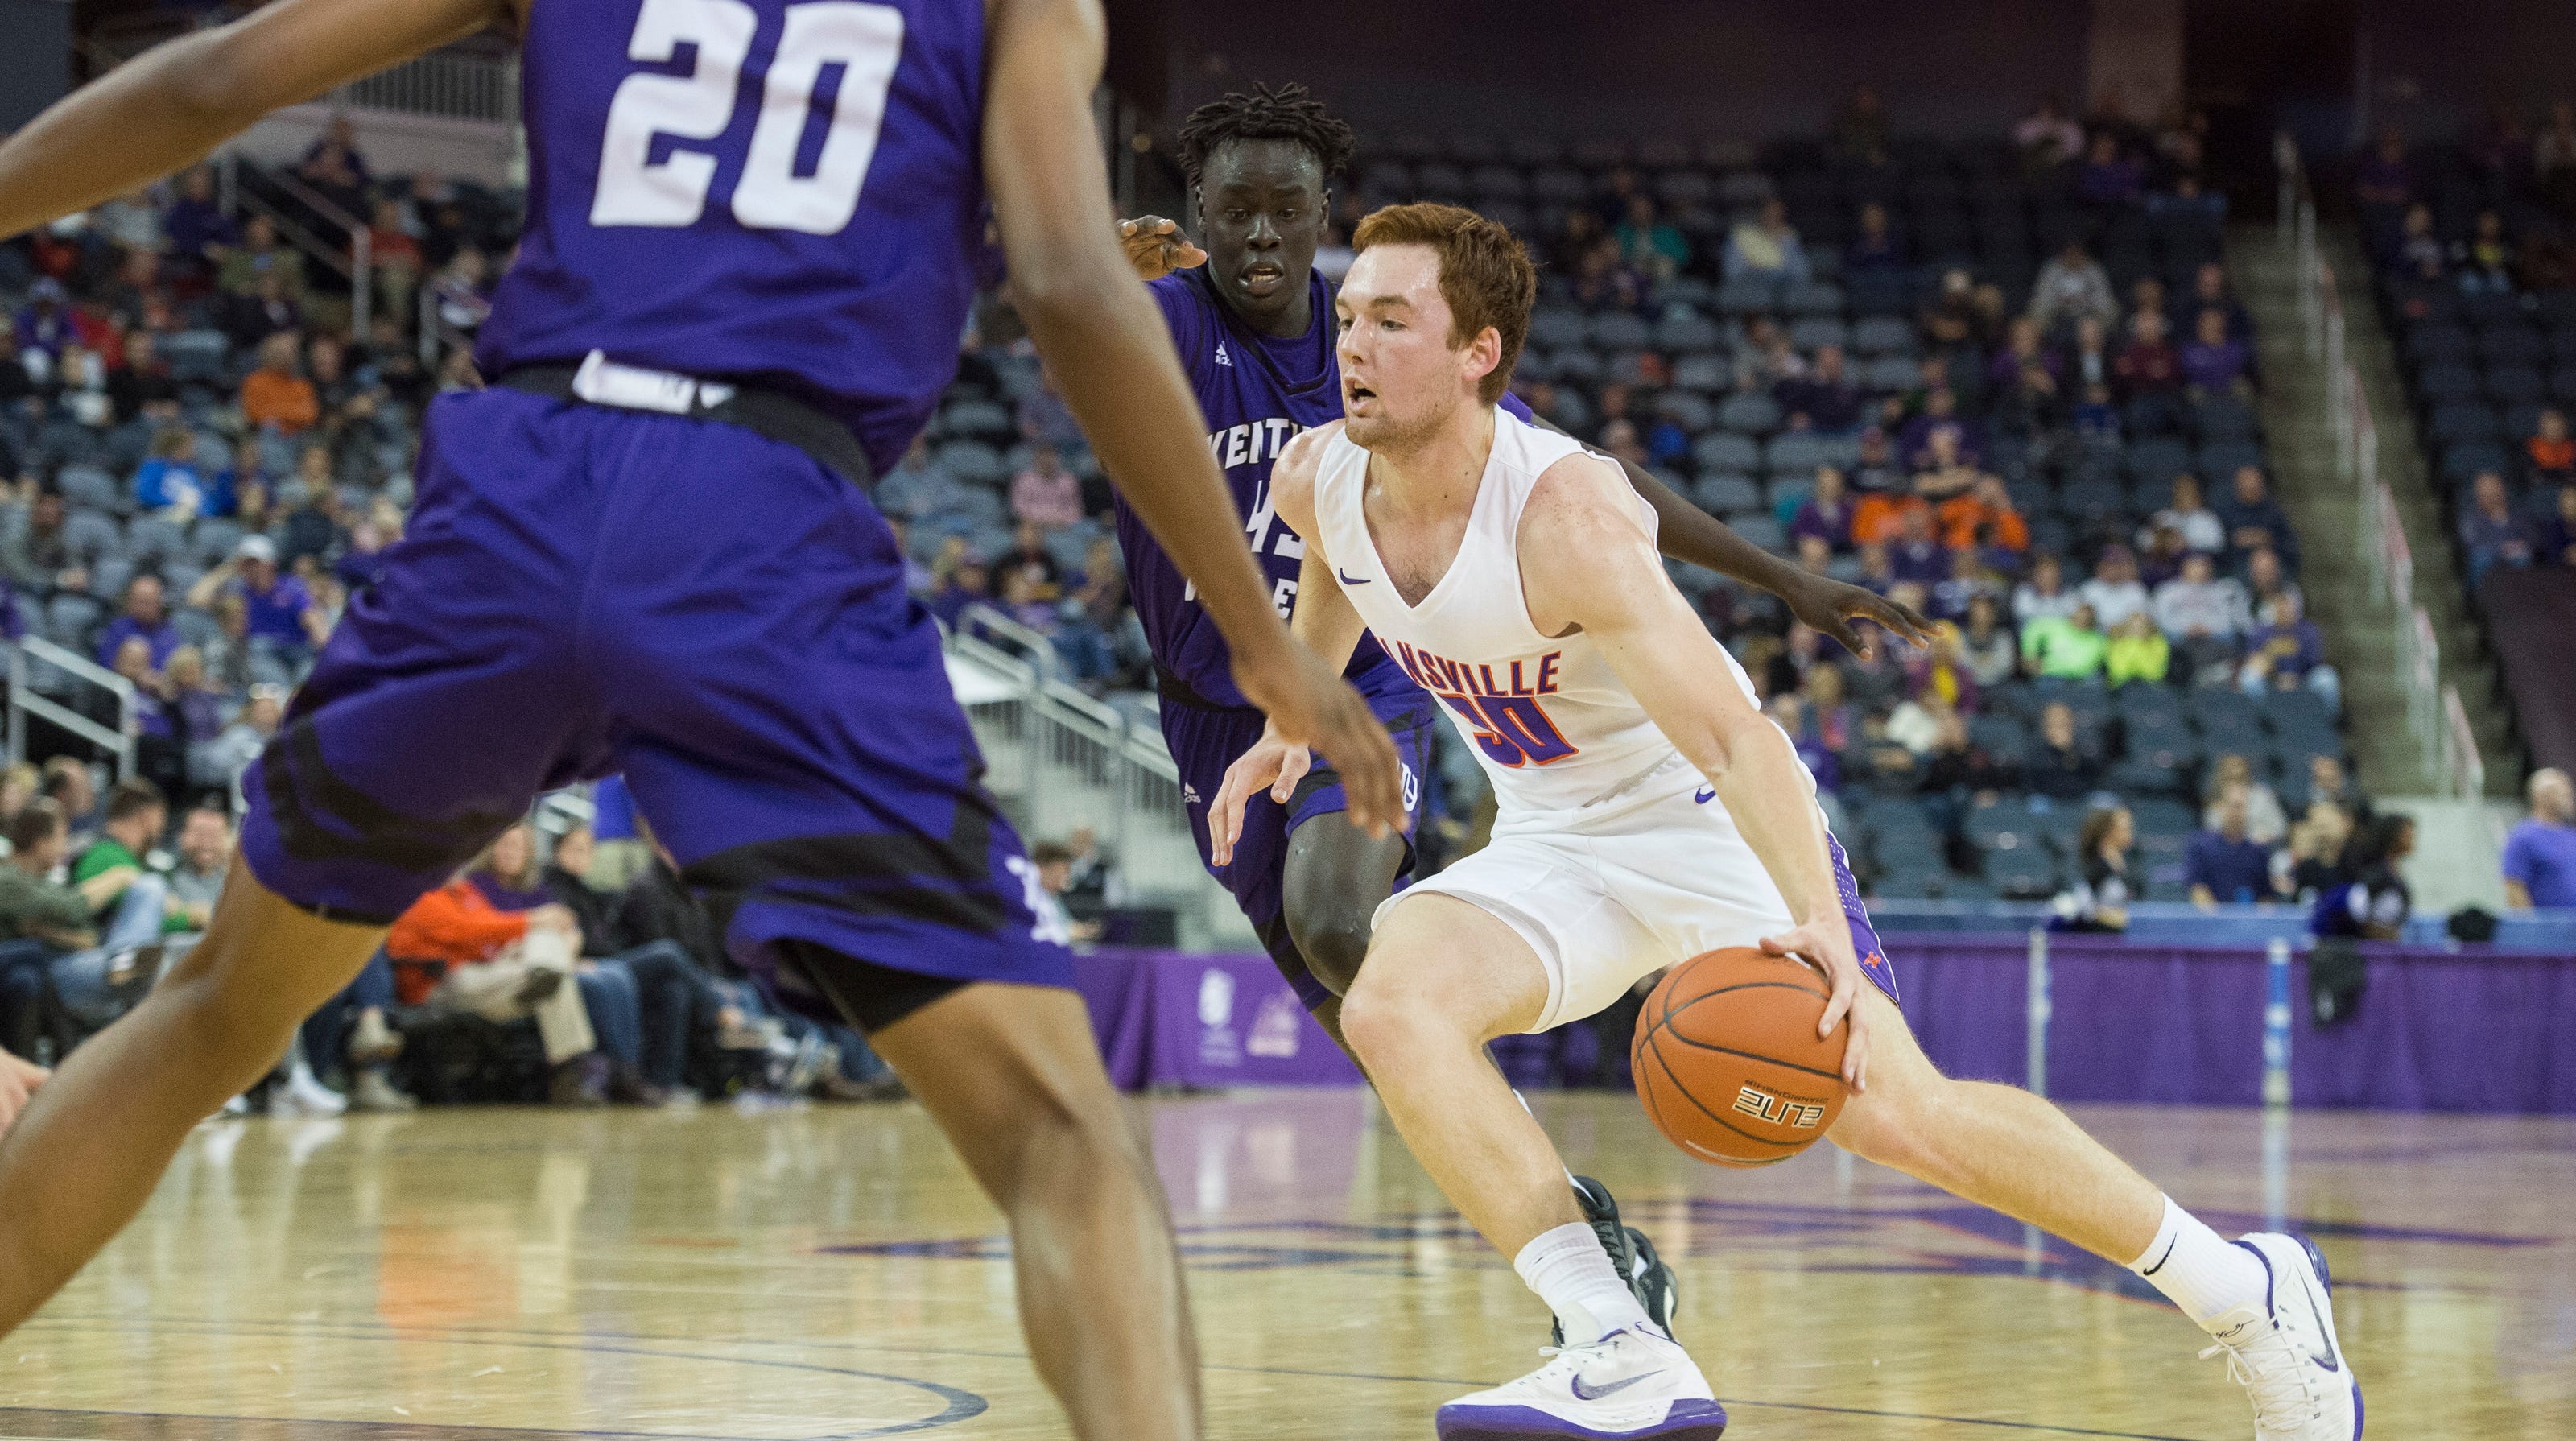  A healthy, more fit Noah Frederking playing key role off bench for Evansville basketball 